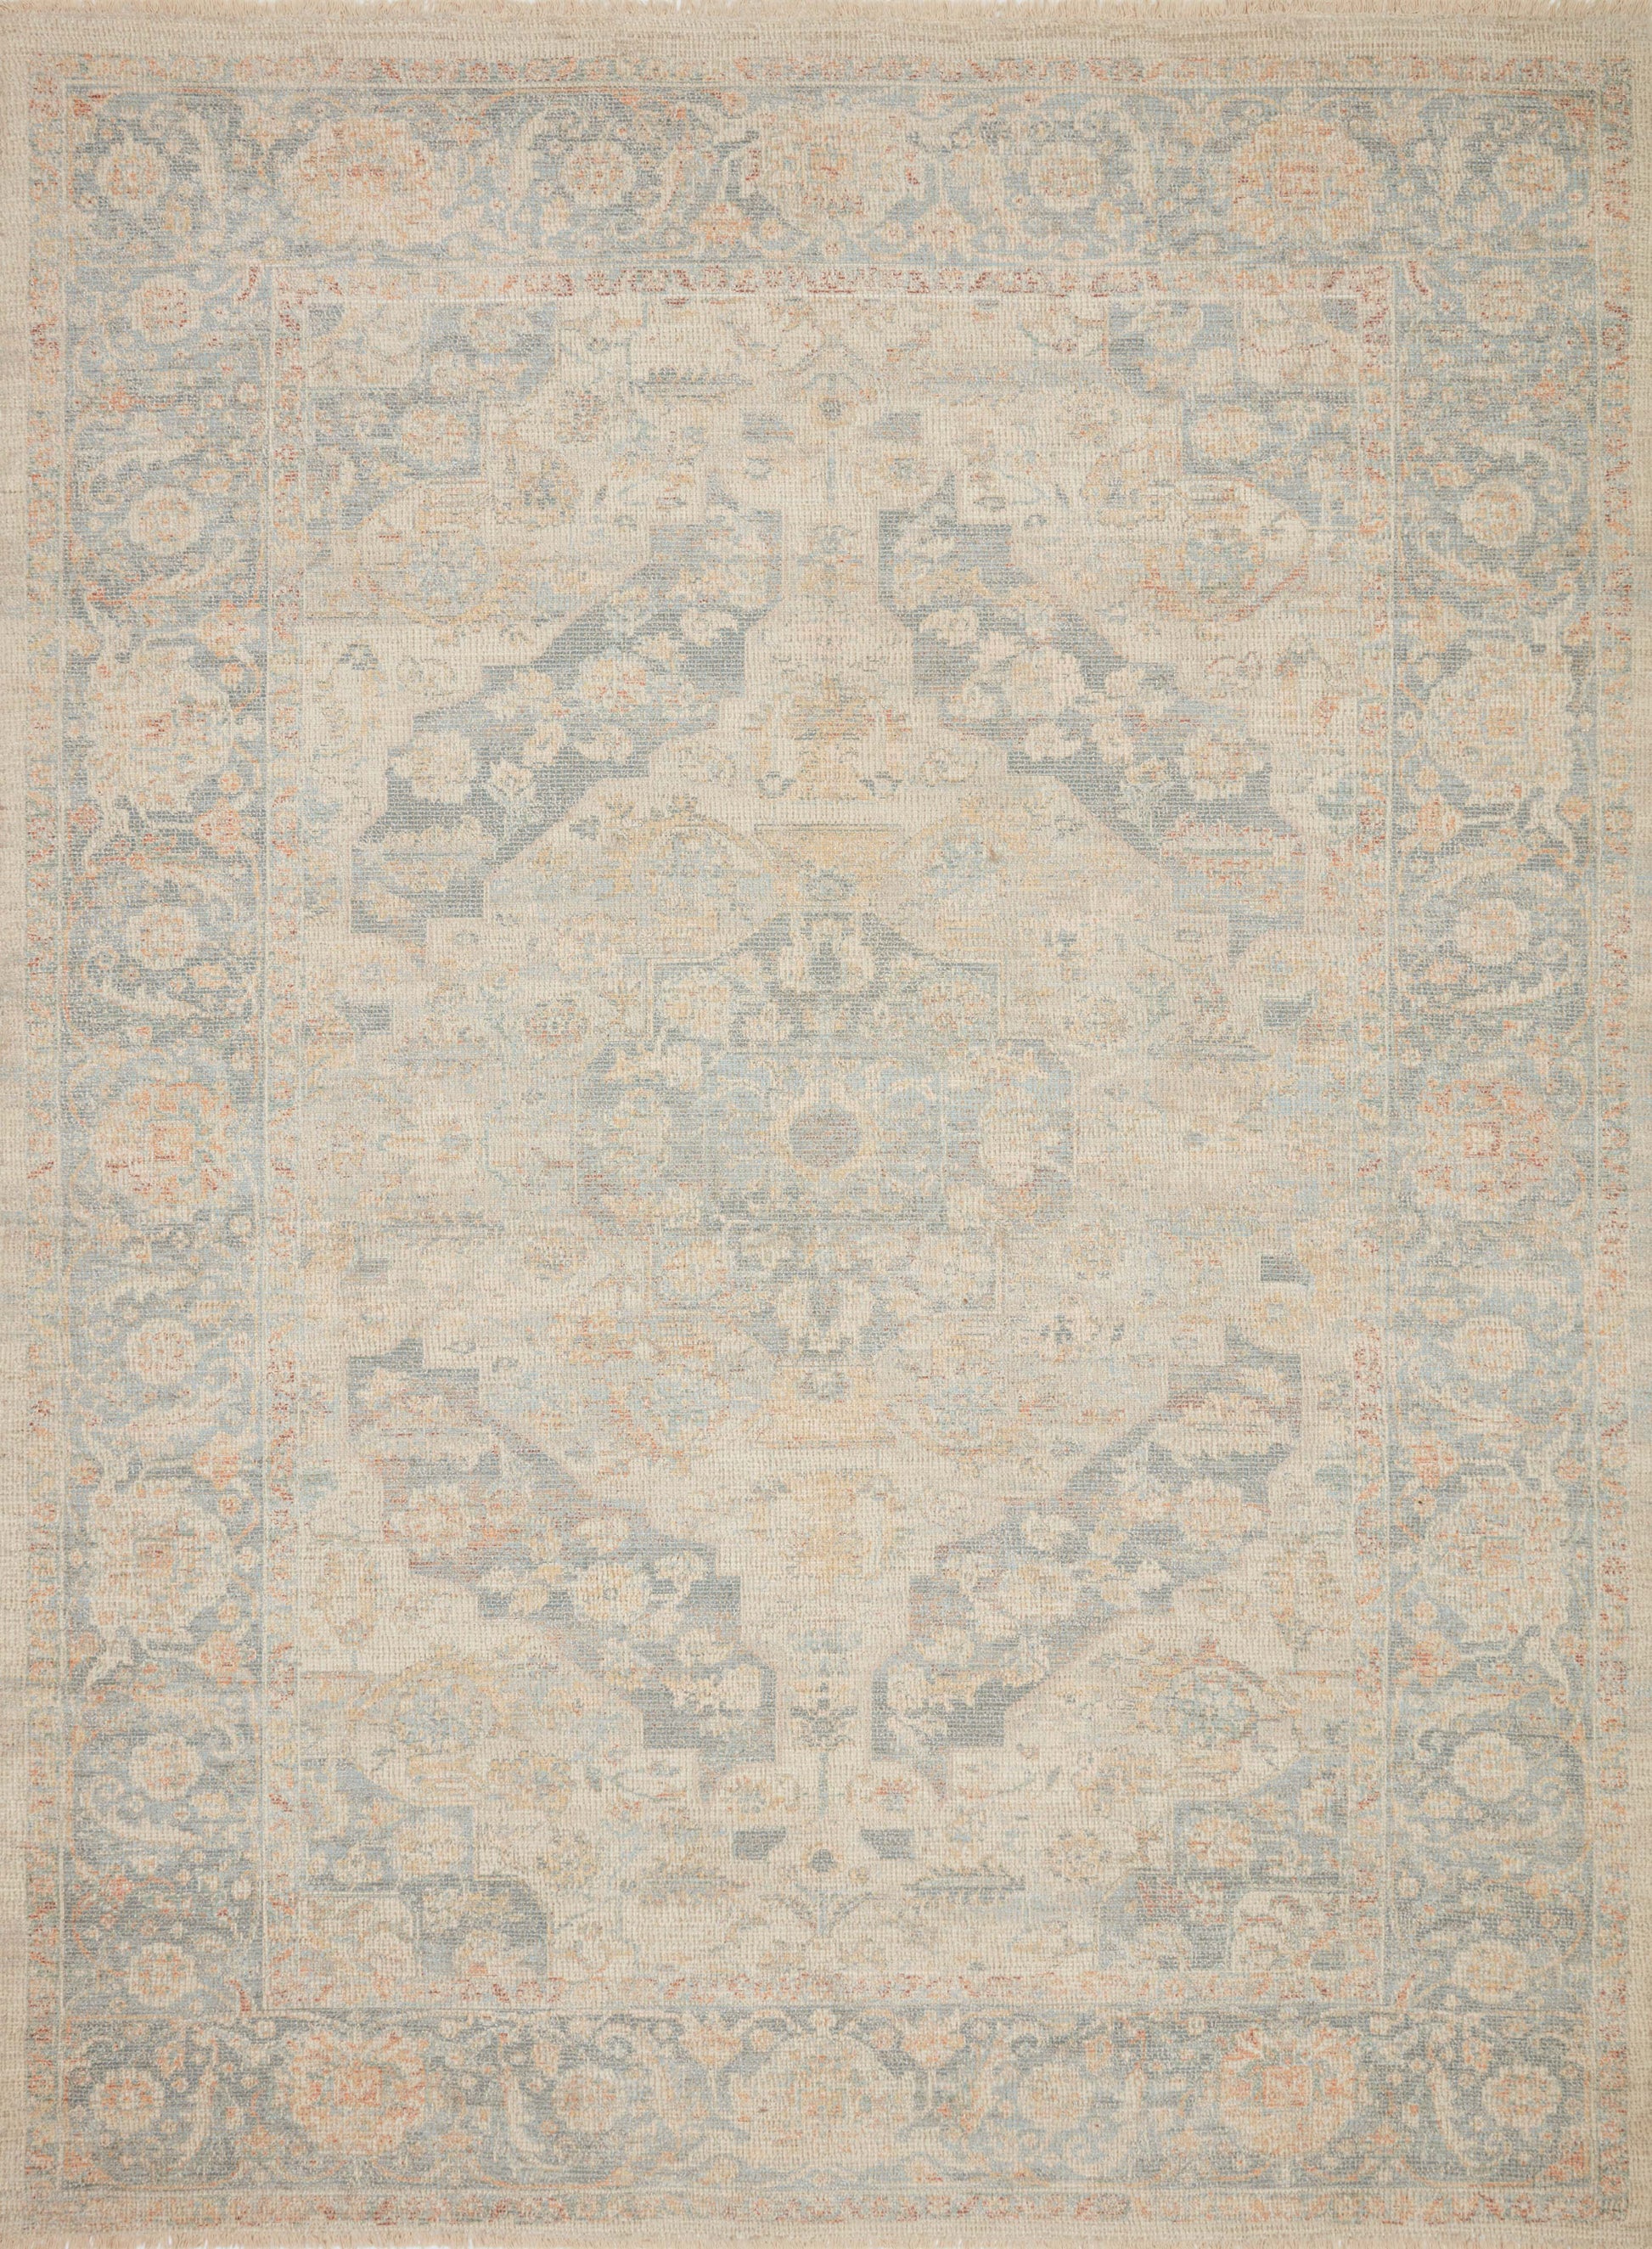 A picture of Loloi's Priya rug, in style PRY-08, color Bone / Bluestone